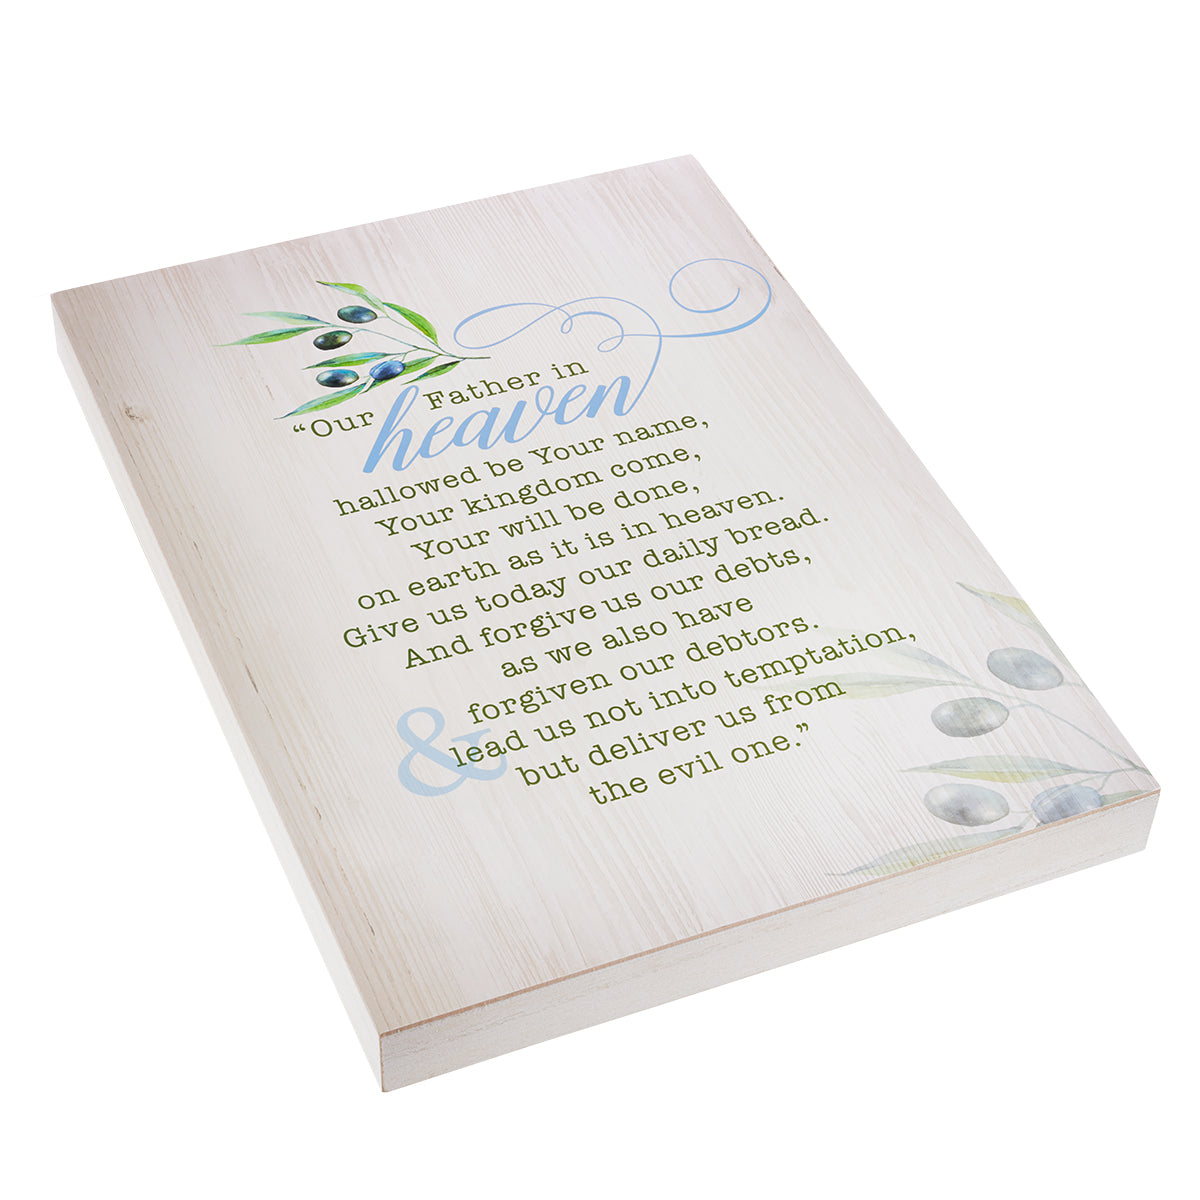 Image of Wall Plaque-Lord's Prayer other